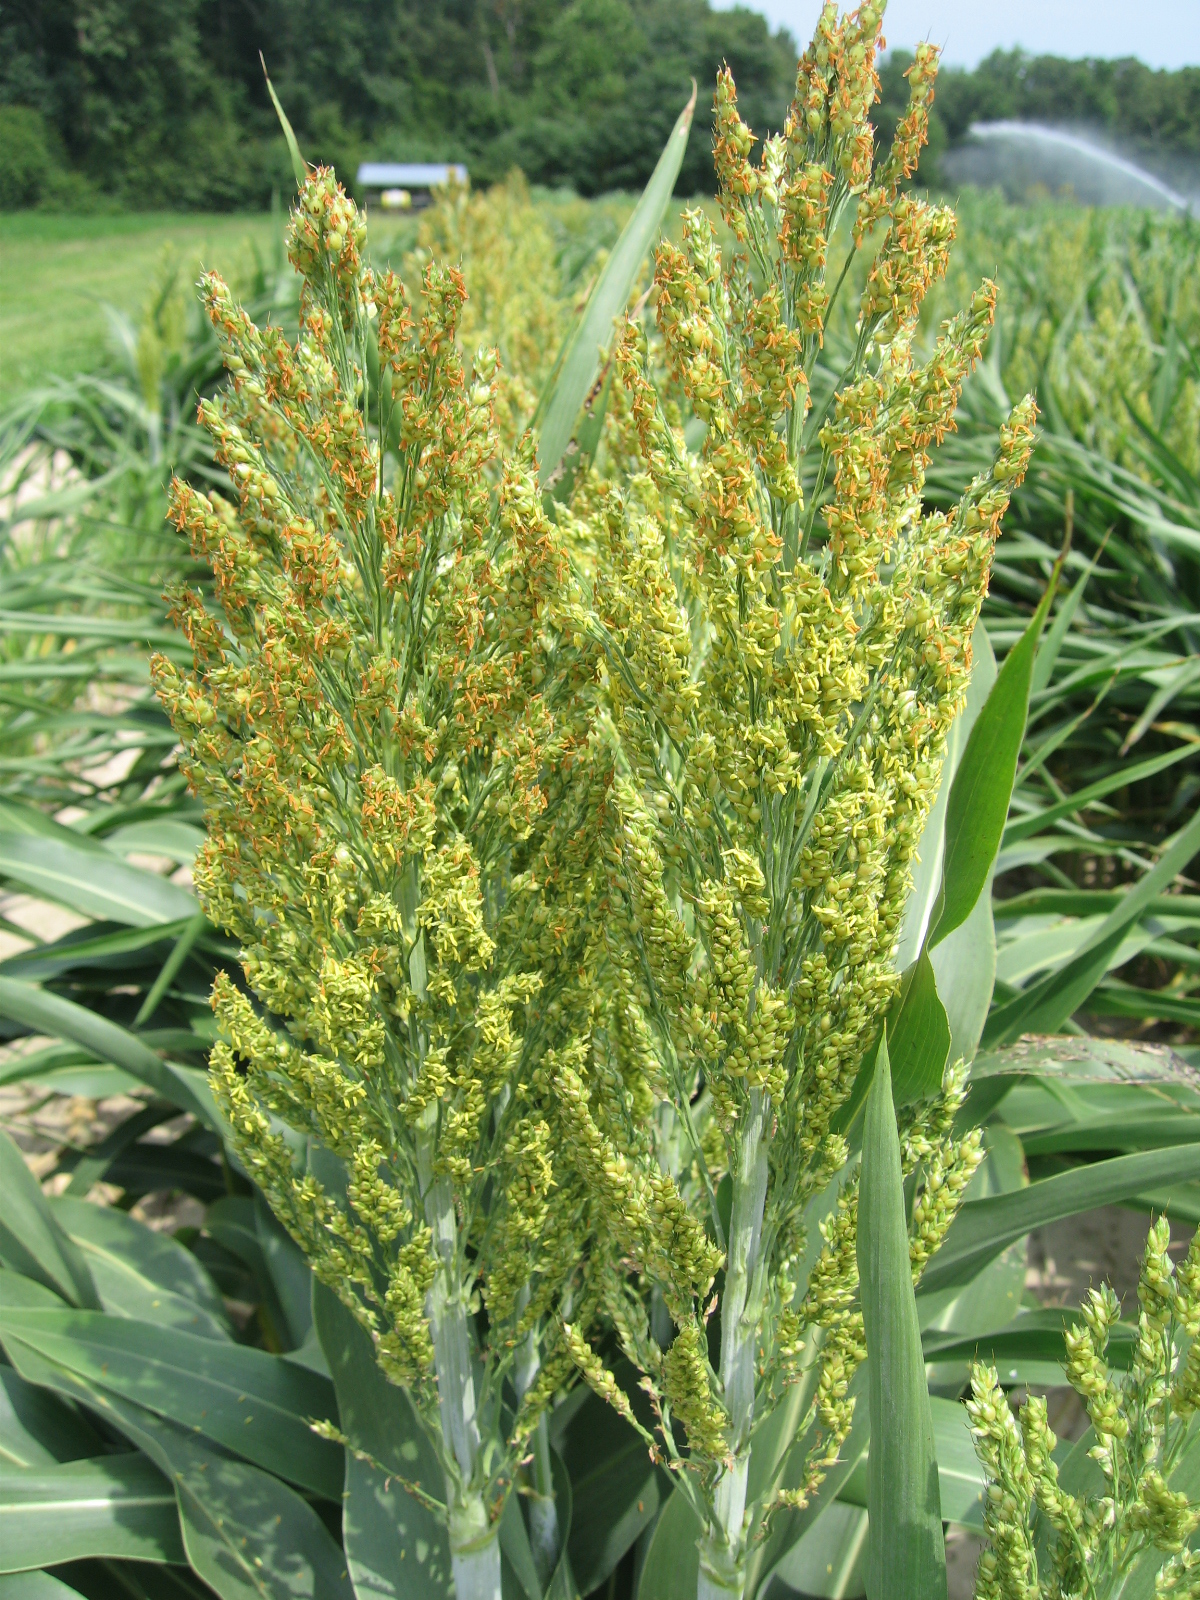 Sorghum panicles at a late flowering stage. If over 50% of your field is at this stage, you should have sprayed Headline already.